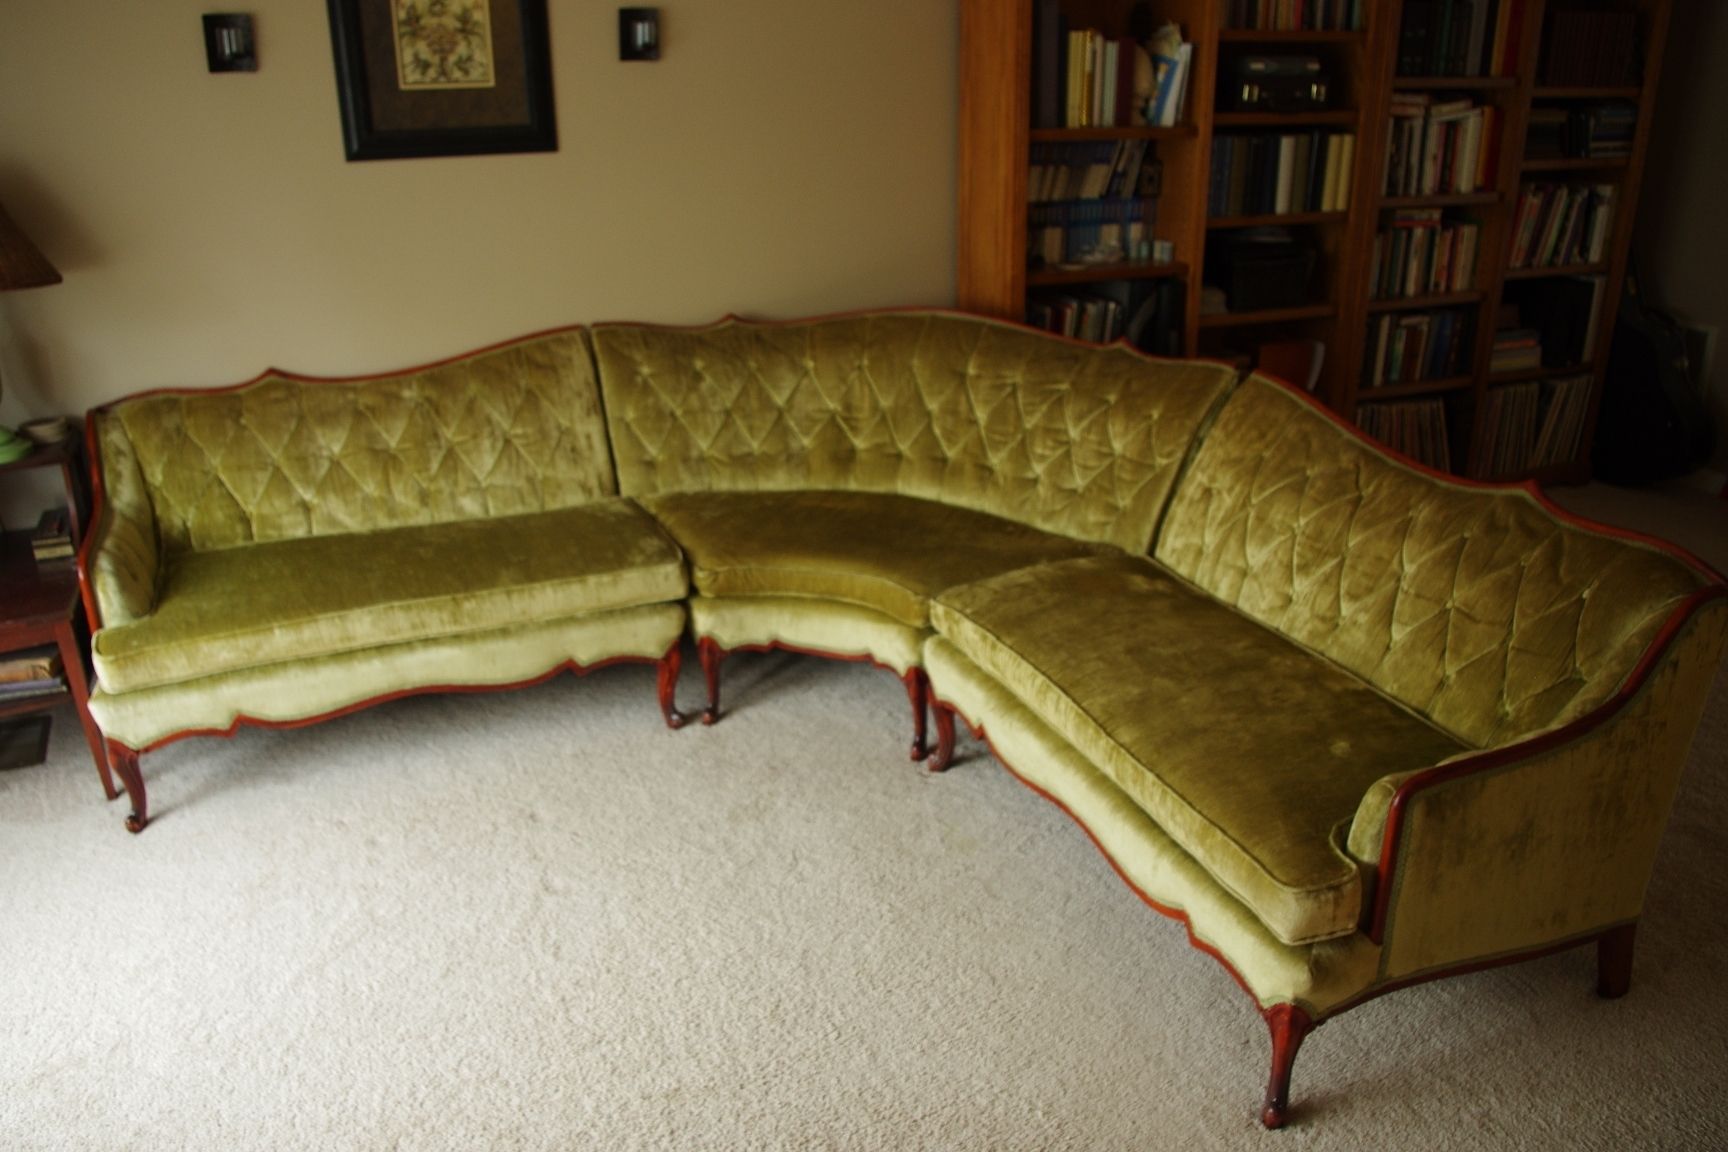 Vintage 1950s Sectional Sofa • Sectional Sofa Regarding Vintage Sectional Sofas (View 1 of 10)